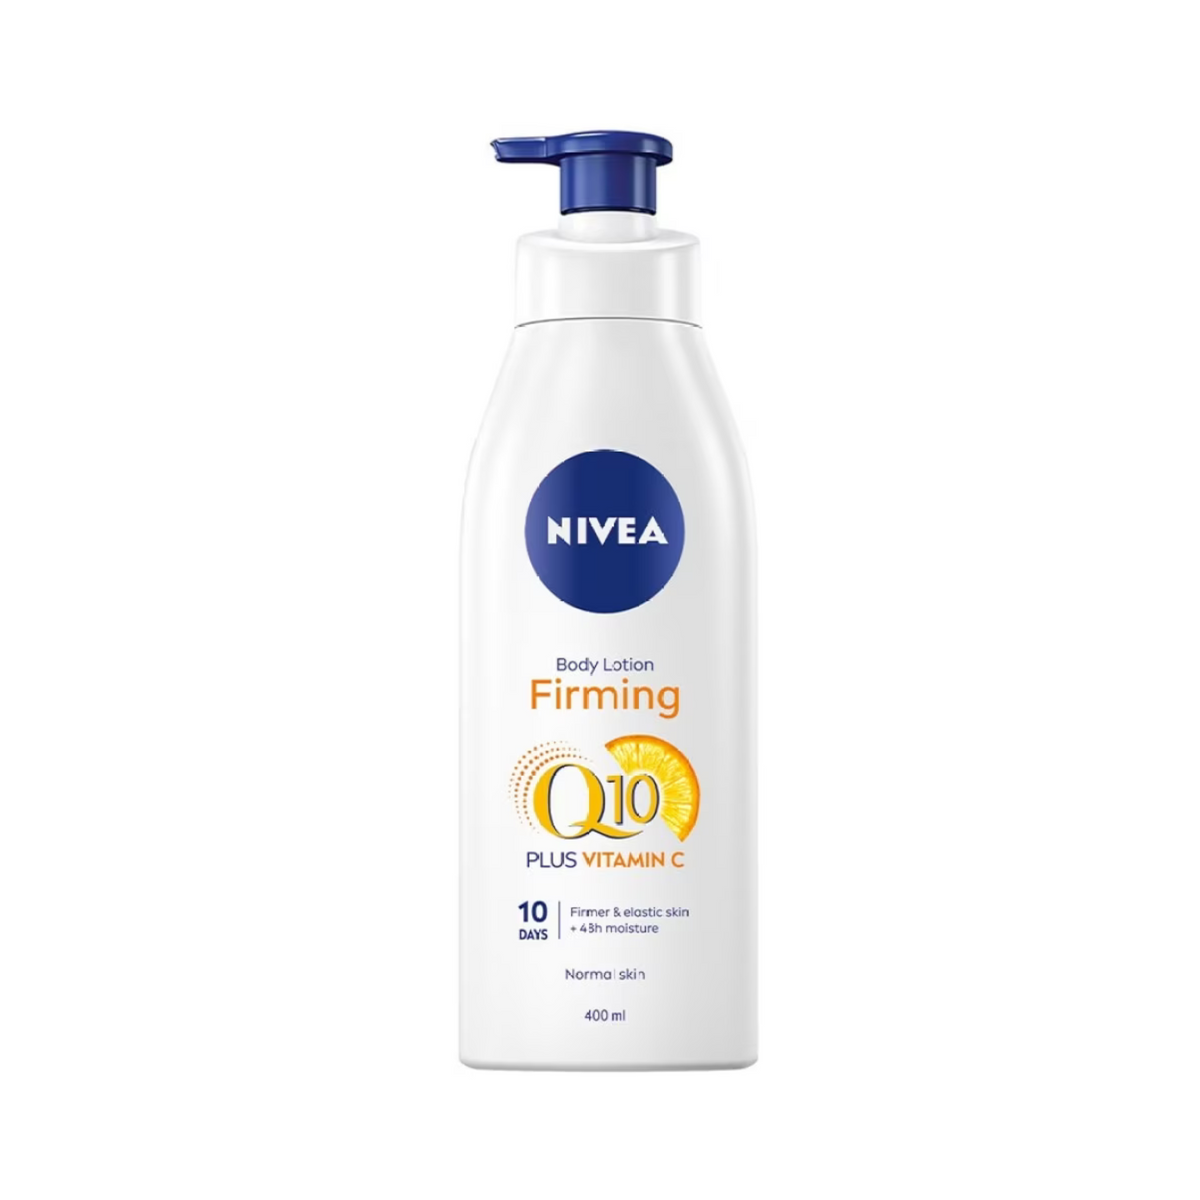 Q10 + Vitamin C Firming Body Lotion for Normal Skin